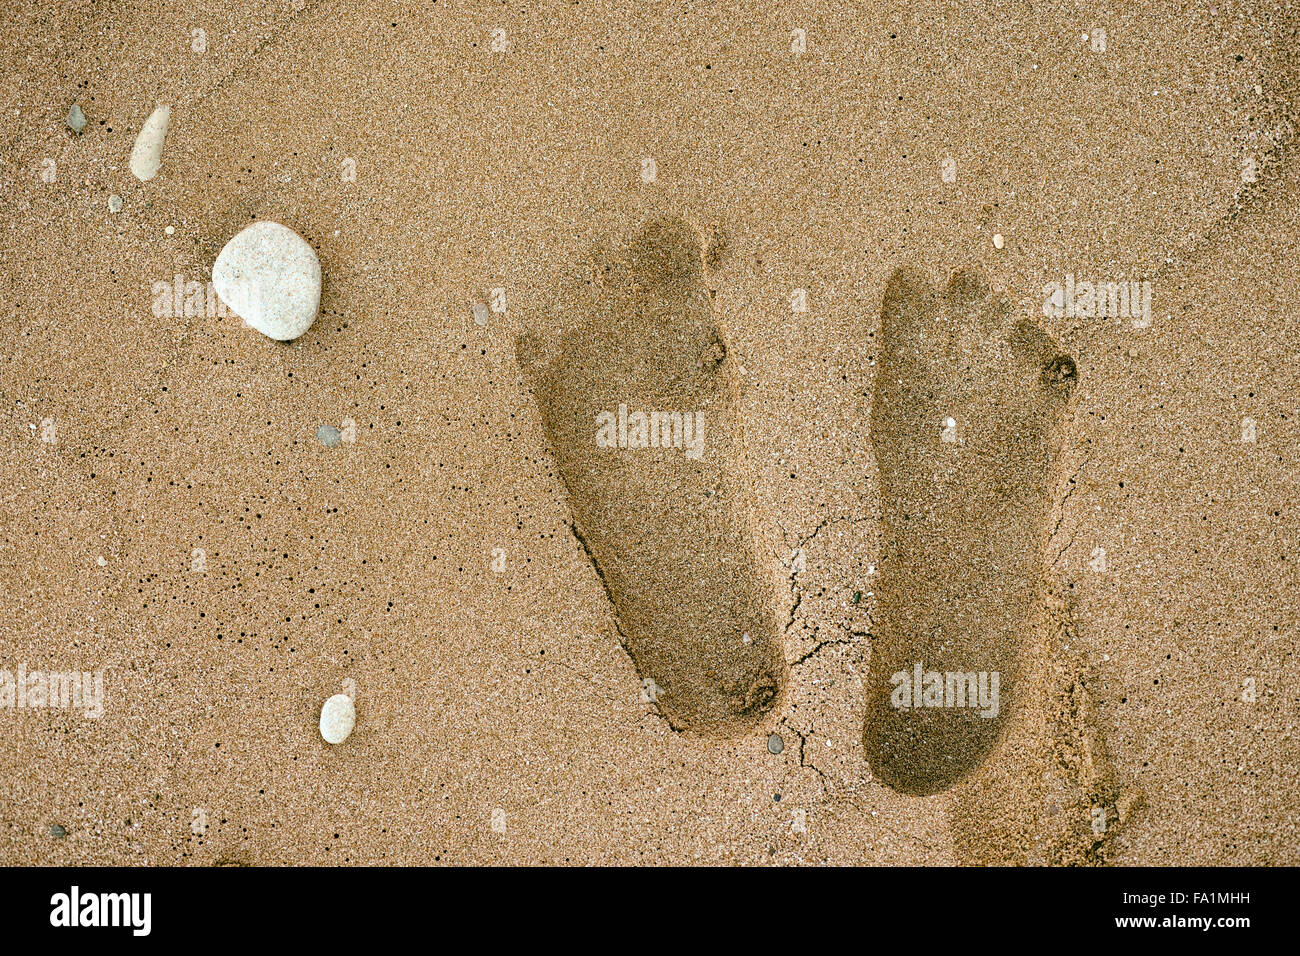 Human footprints on the sand. Close up. Stock Photo